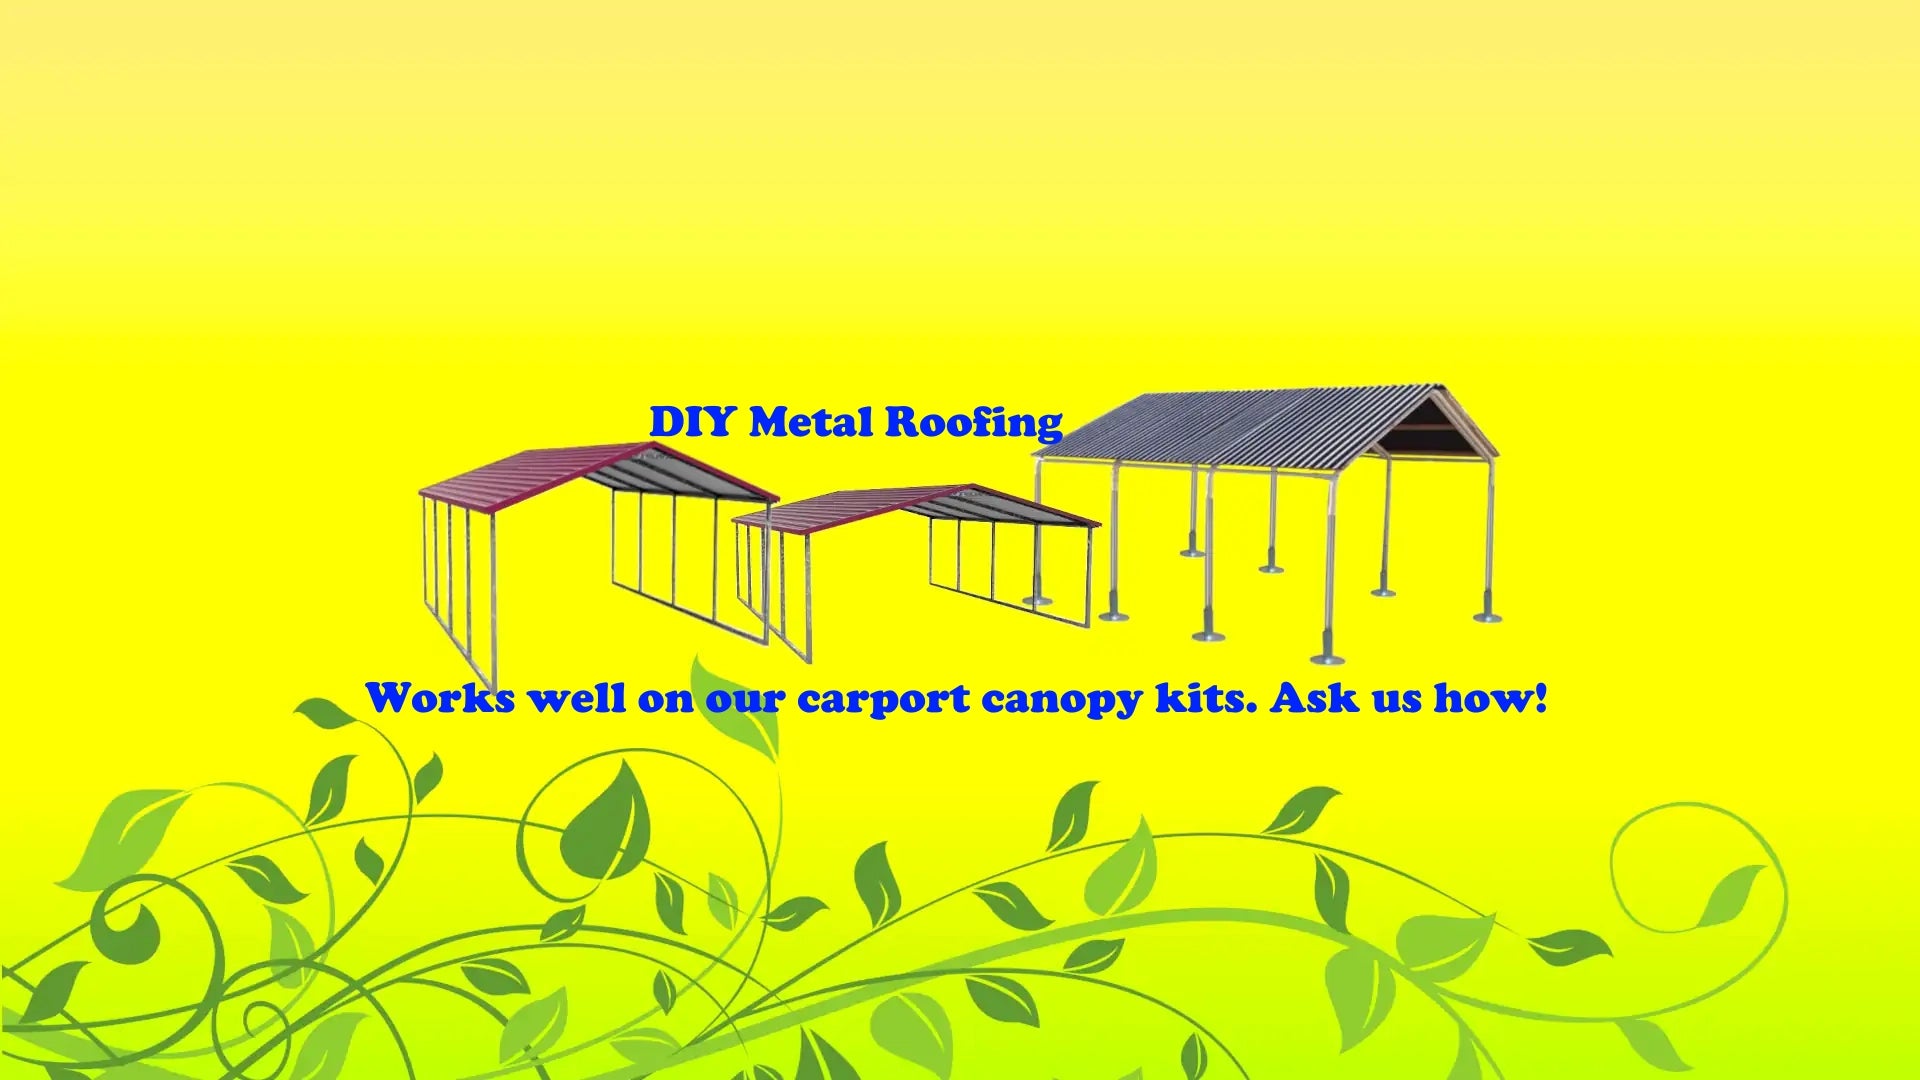 metal_roof_home_improvement_carport_canopy_kits_odcdeals